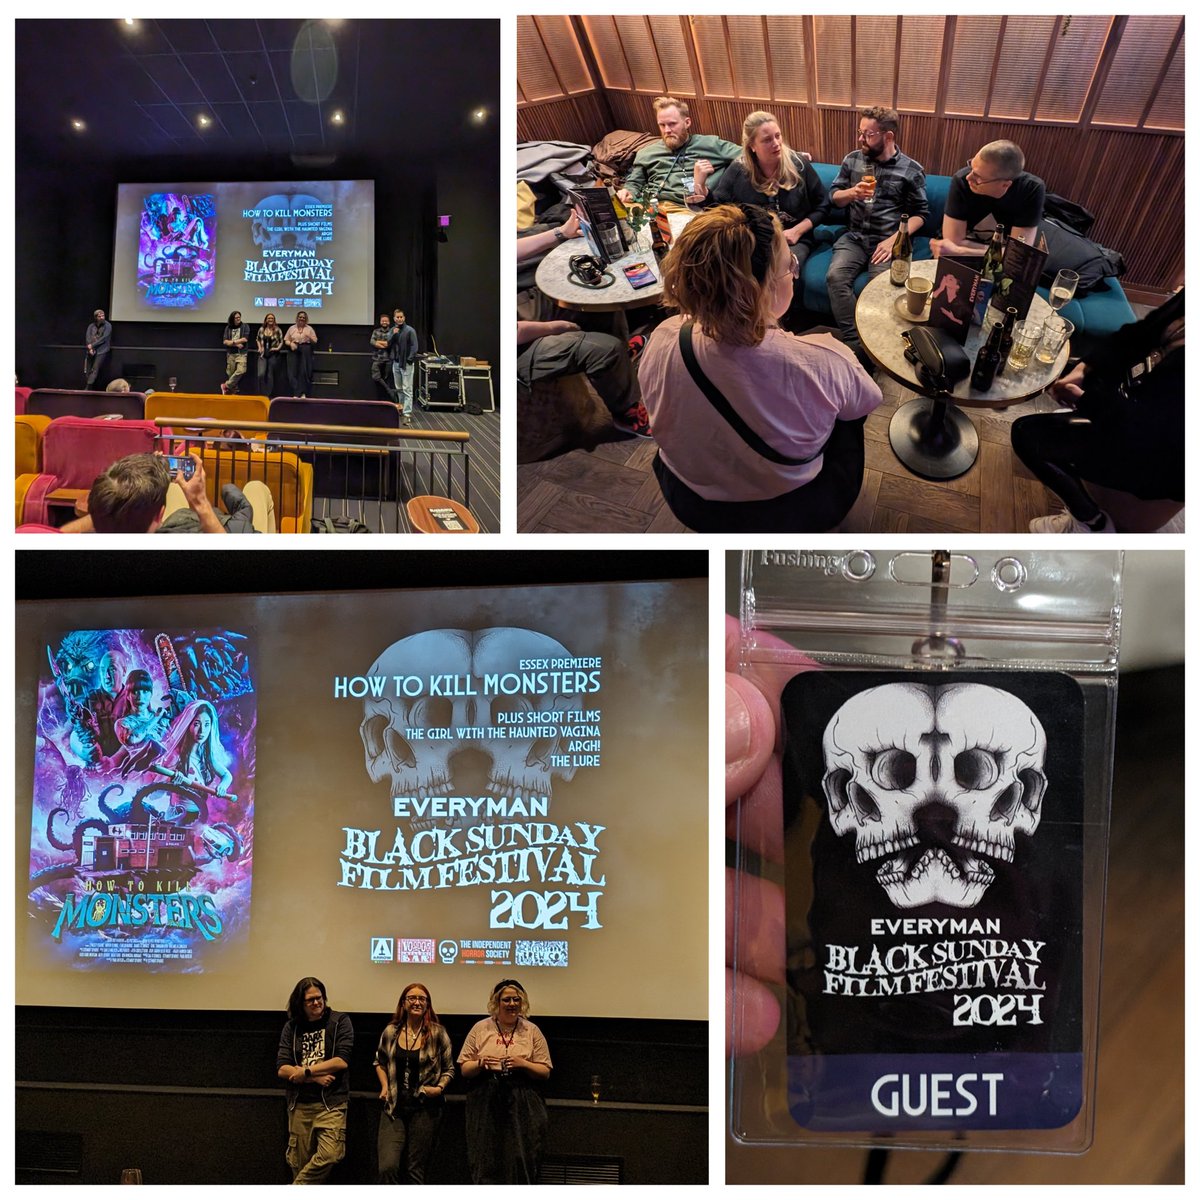 Popped into the @BlackSunday_Co fest at @everymanchelmsford cool venue, great vibe and caught @htkmonsters and some cracking shorts including The Girl With The Haunted Vagina by @PanadTweets @bonhamkt 🙌🏾